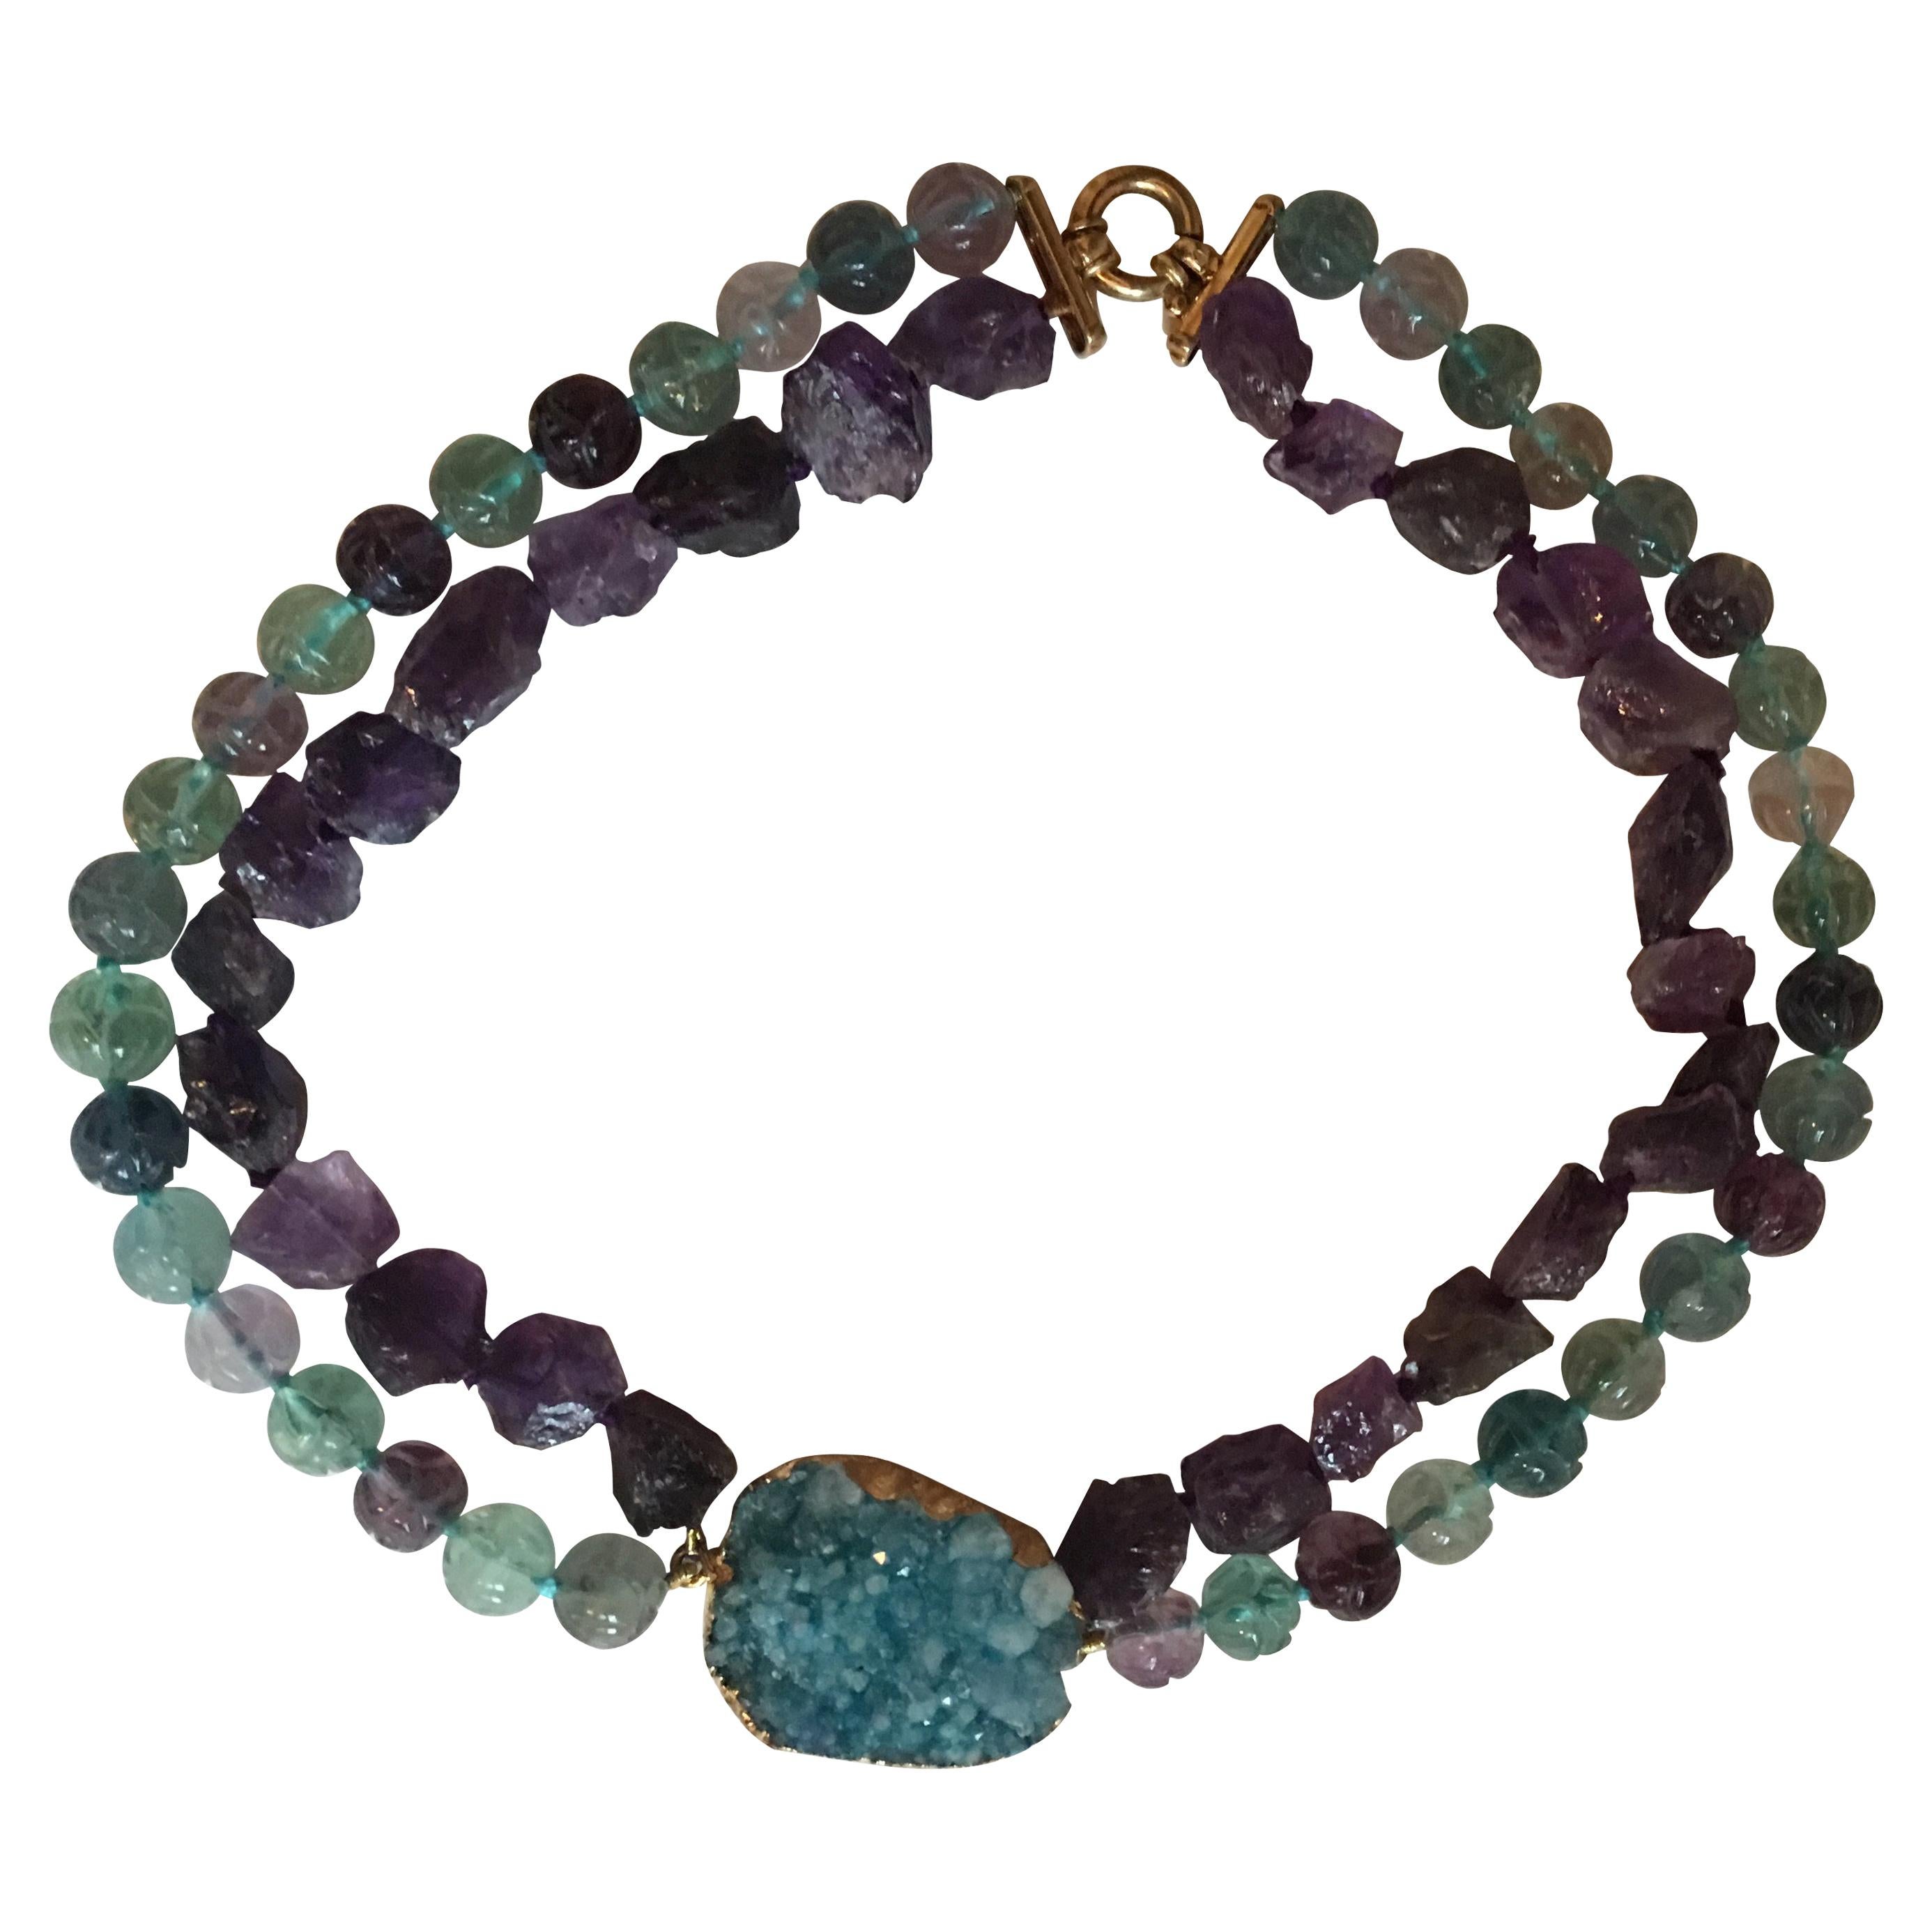 Druzy Agate Necklace Tourmaline Amethyst Gold-Plated